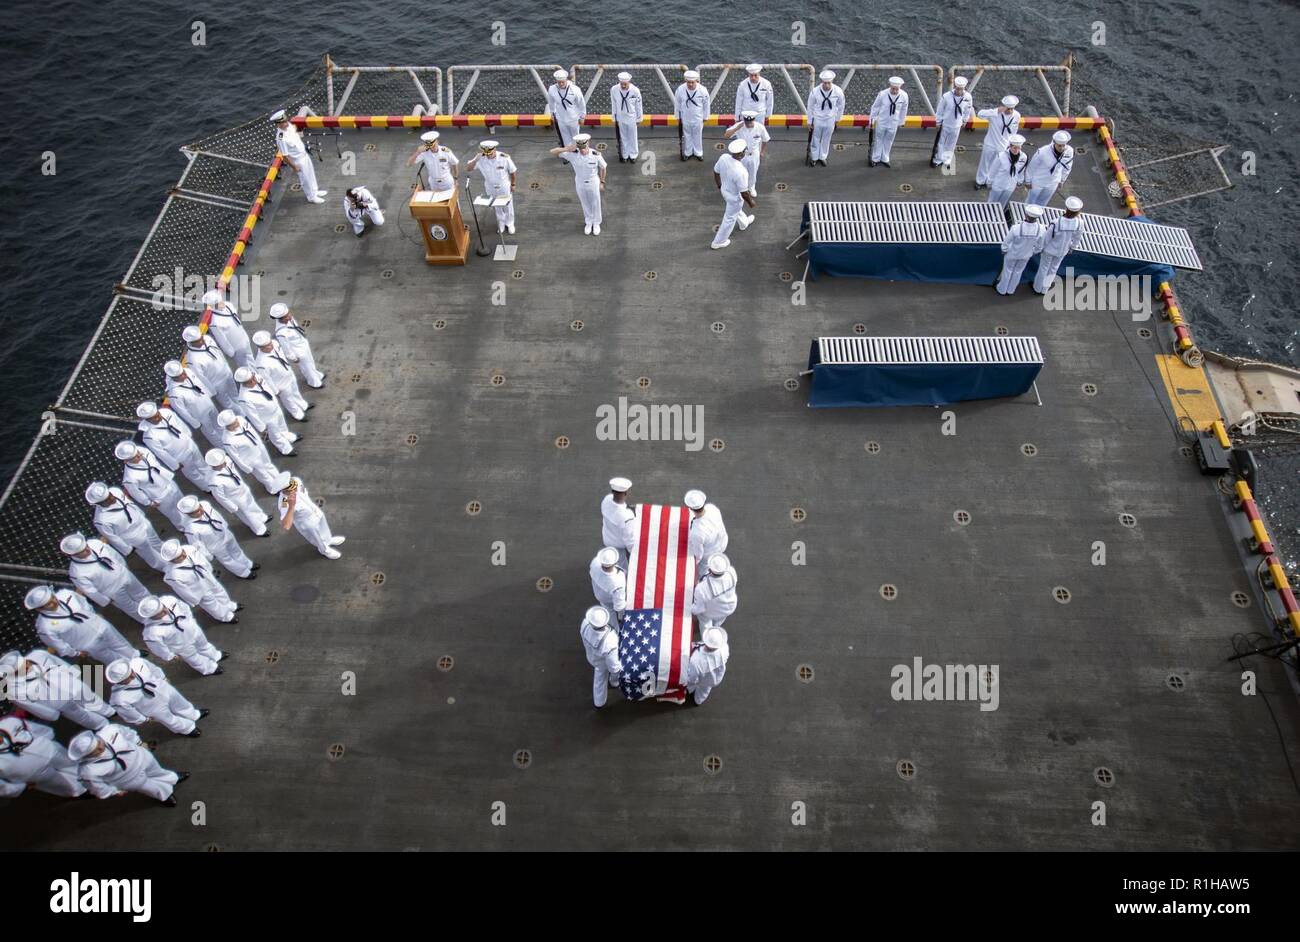 PACIFIC OCEAN (Sept. 19, 2018) Sailors, assigned to the amphibious assault ship USS Bonhomme Richard (LHD 6), serve as pallbearers during a burial at sea ceremony held on the ship’s starboard aircraft elevator. Bonhomme Richard is currently underway in the U.S. 3rd Fleet area of operations. Stock Photo